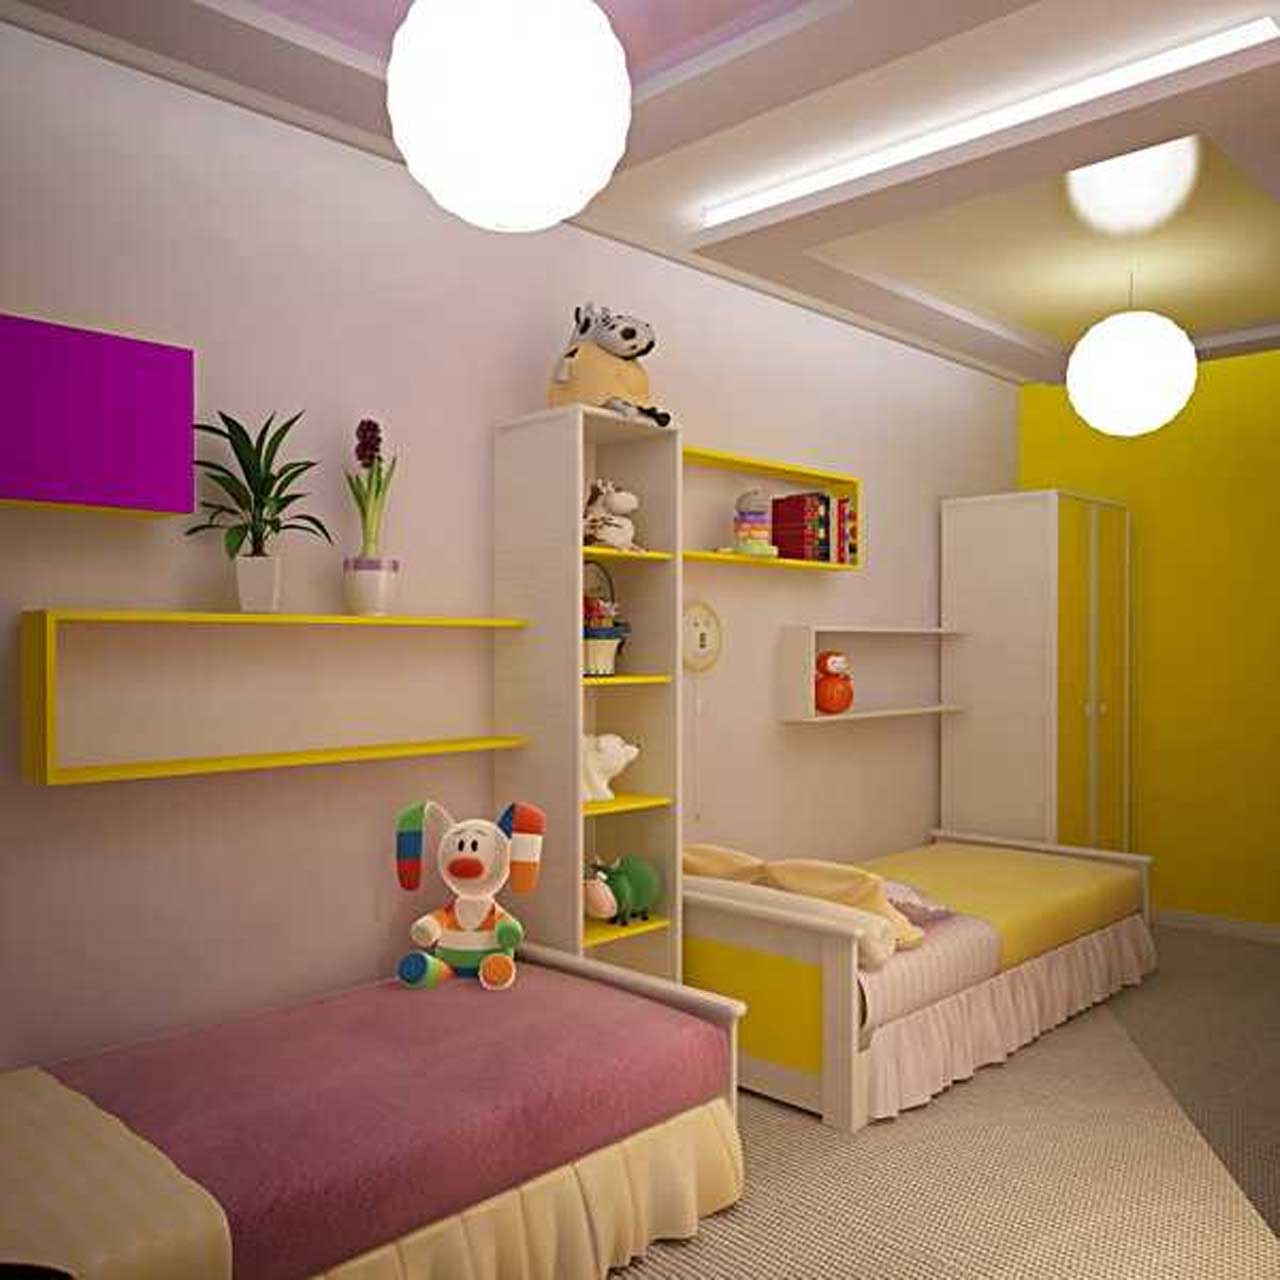 Kids Room Decorating Ideas For 2 Bedroom Furniture With Simple Wooden Dollhouse Shelf Also Funny Animals Doll Kids Room Ideas Plus Trendy Brown Striped Carpet Kids Room Design Ideas